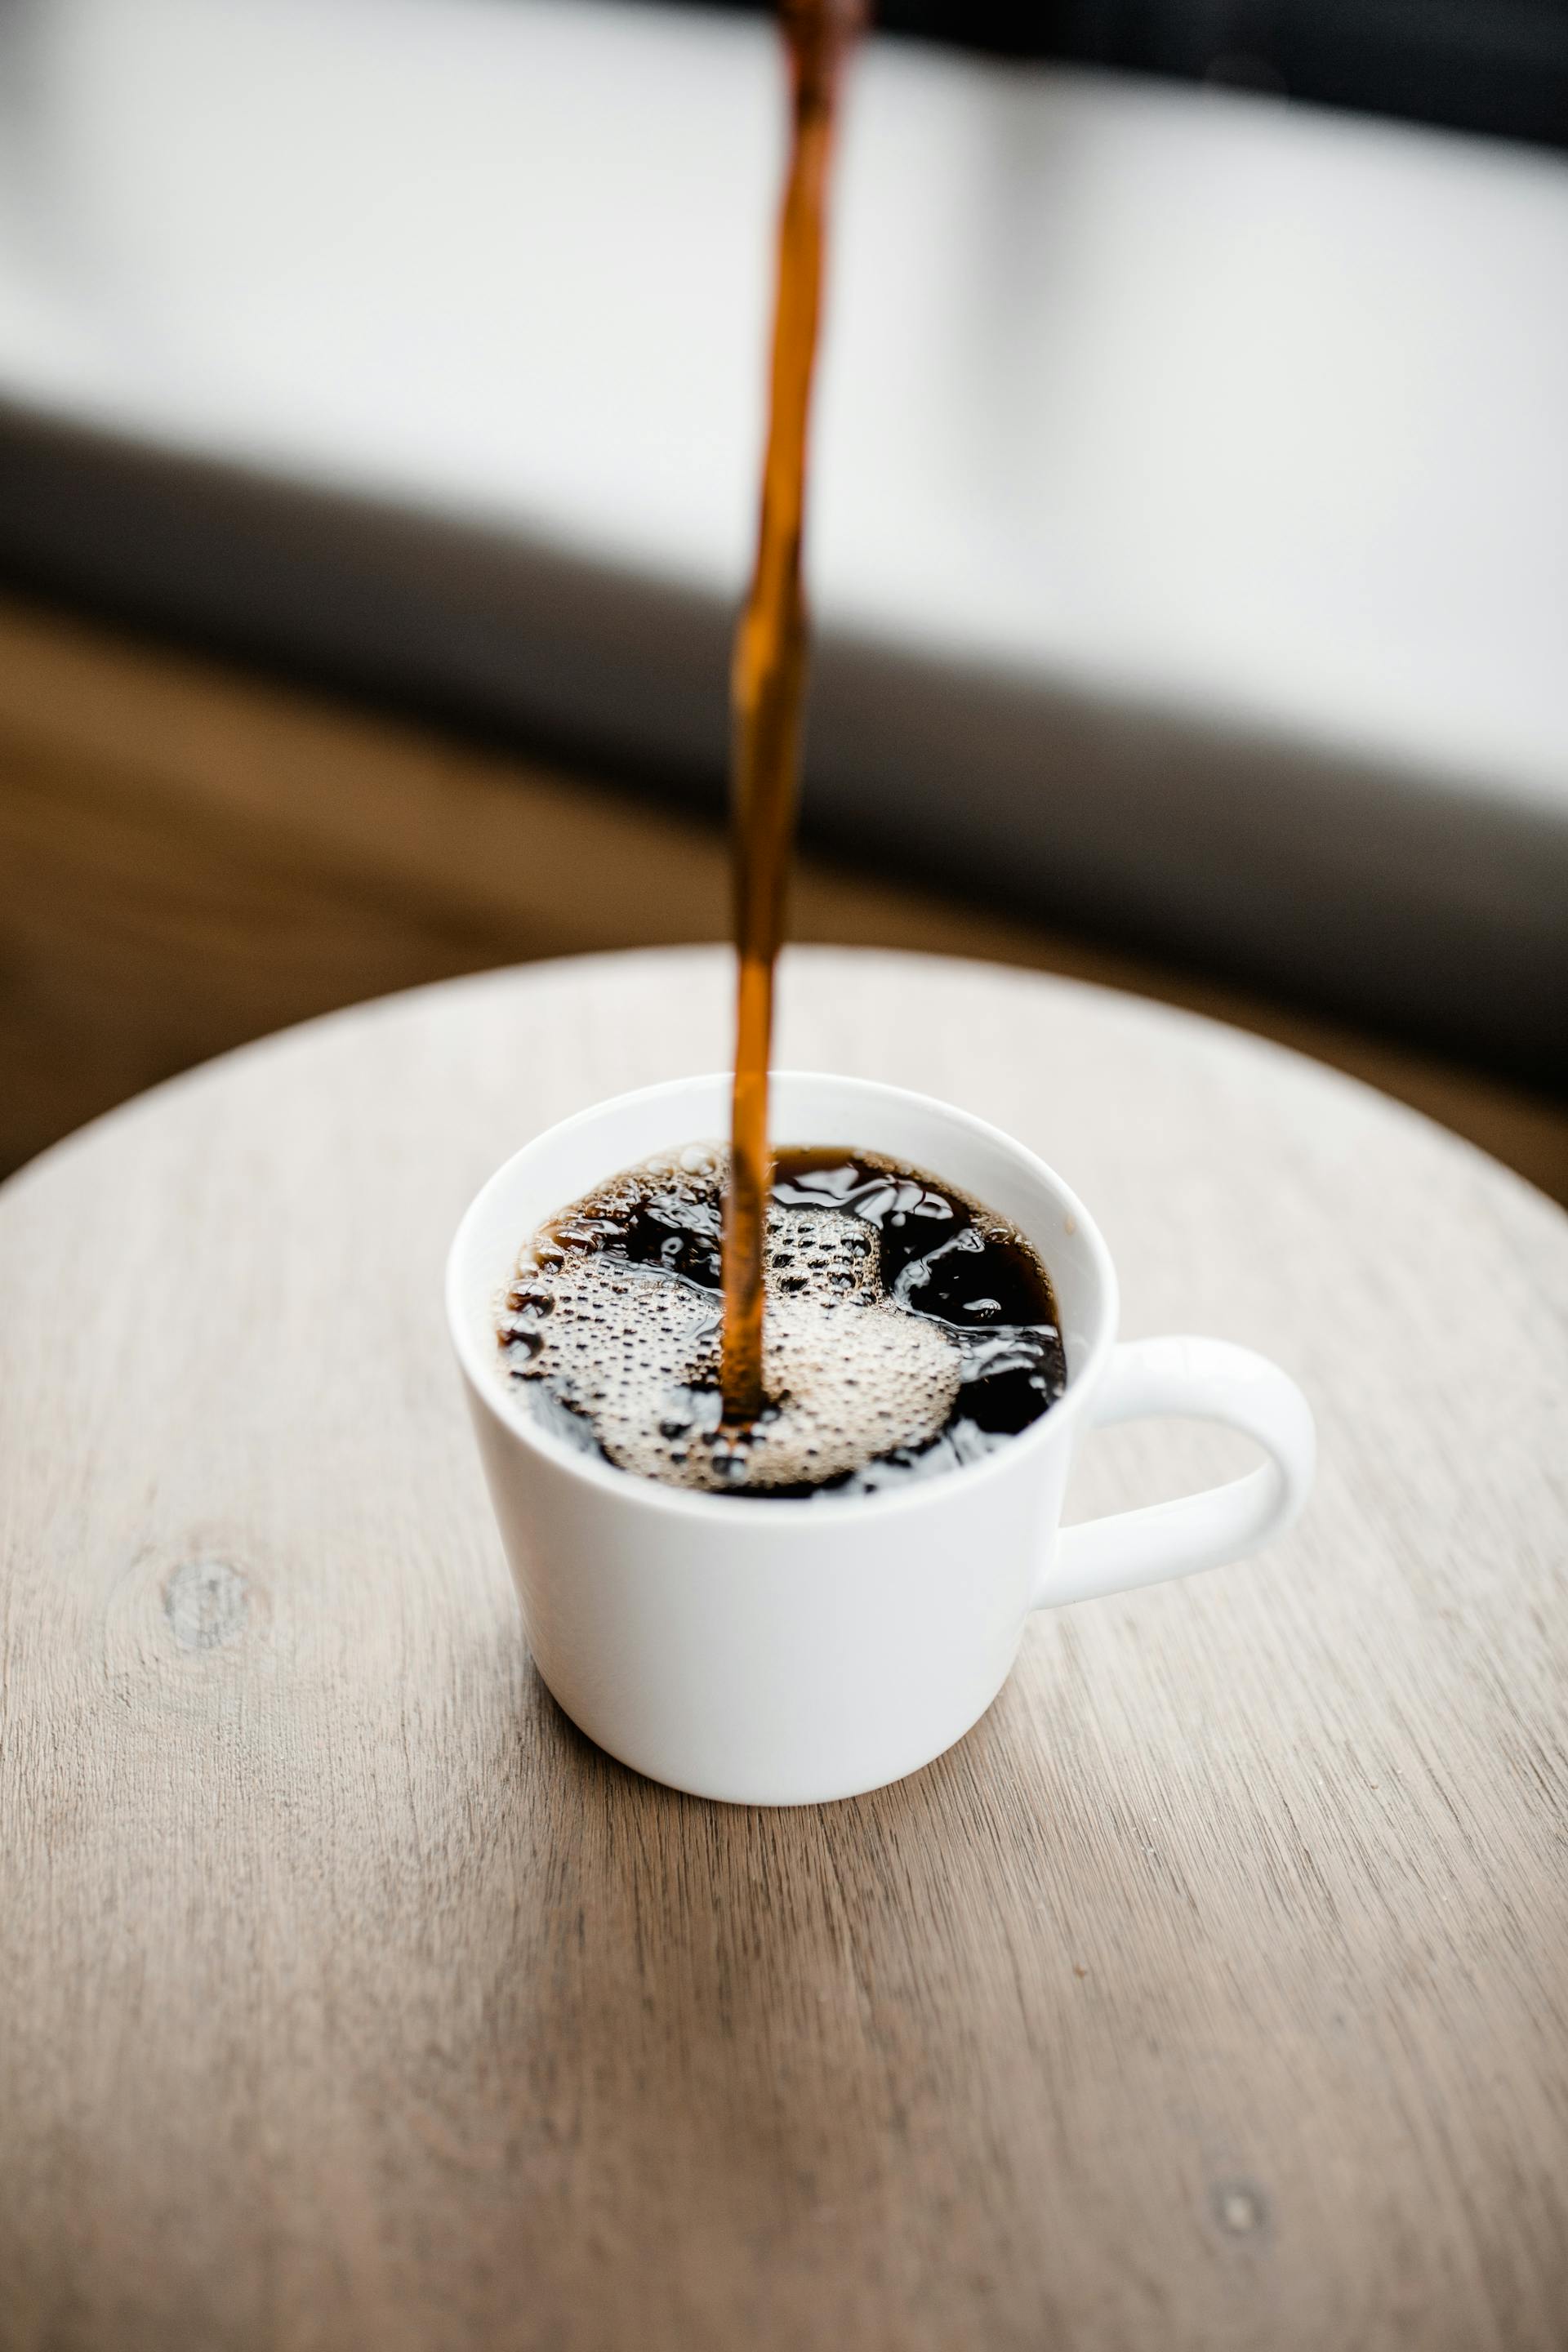 Coffee being poured into a cup | Source: Pexels